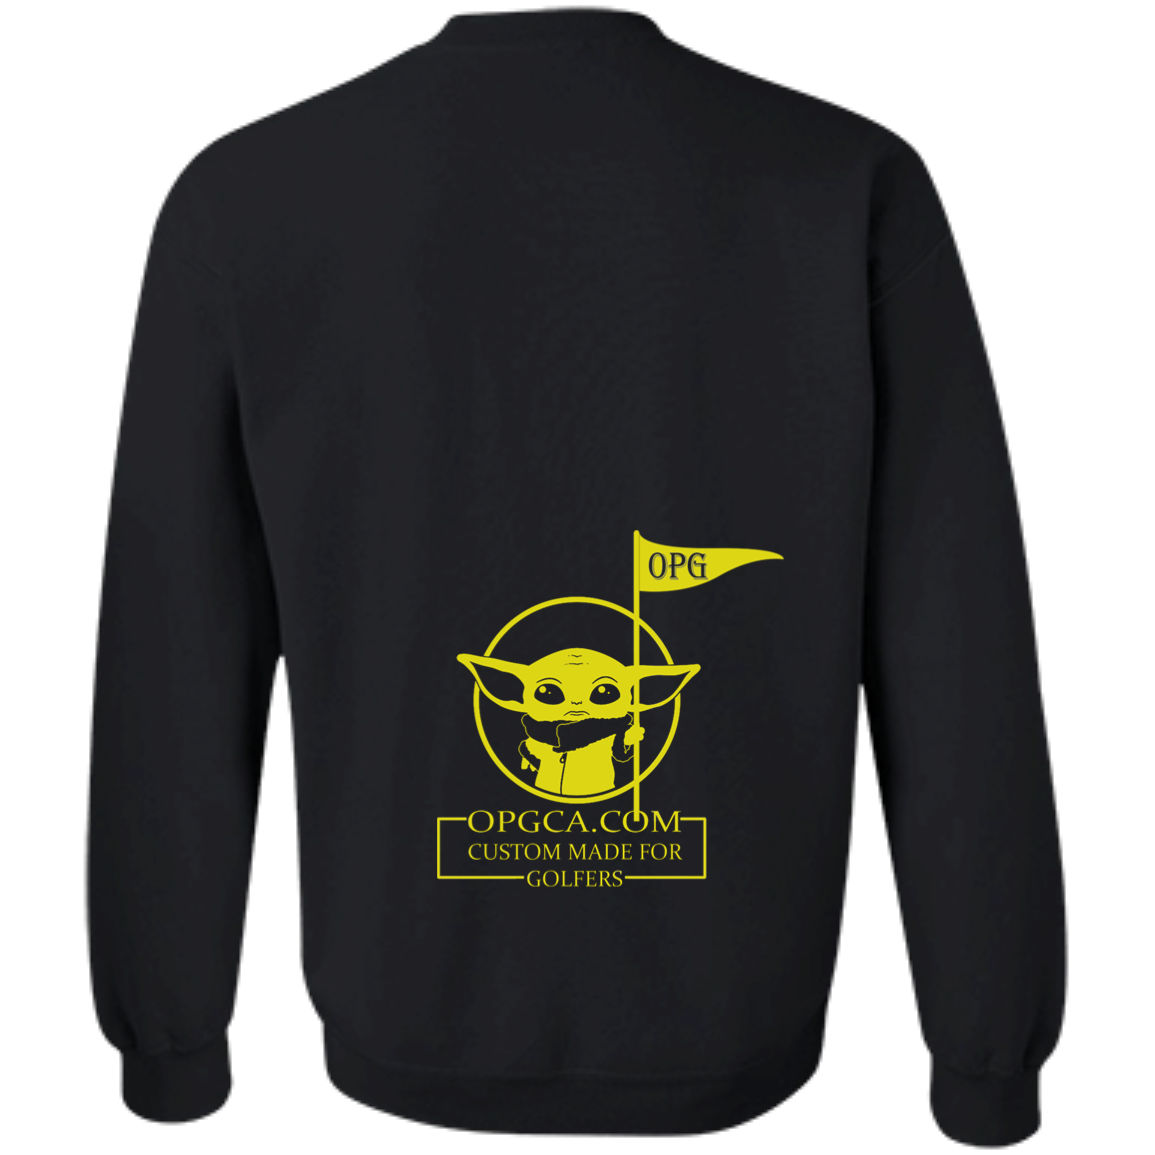 OPG Custom Design #21. May the course be with you. Star Wars Parody and Fan Art. Crewneck Pullover Sweatshirt